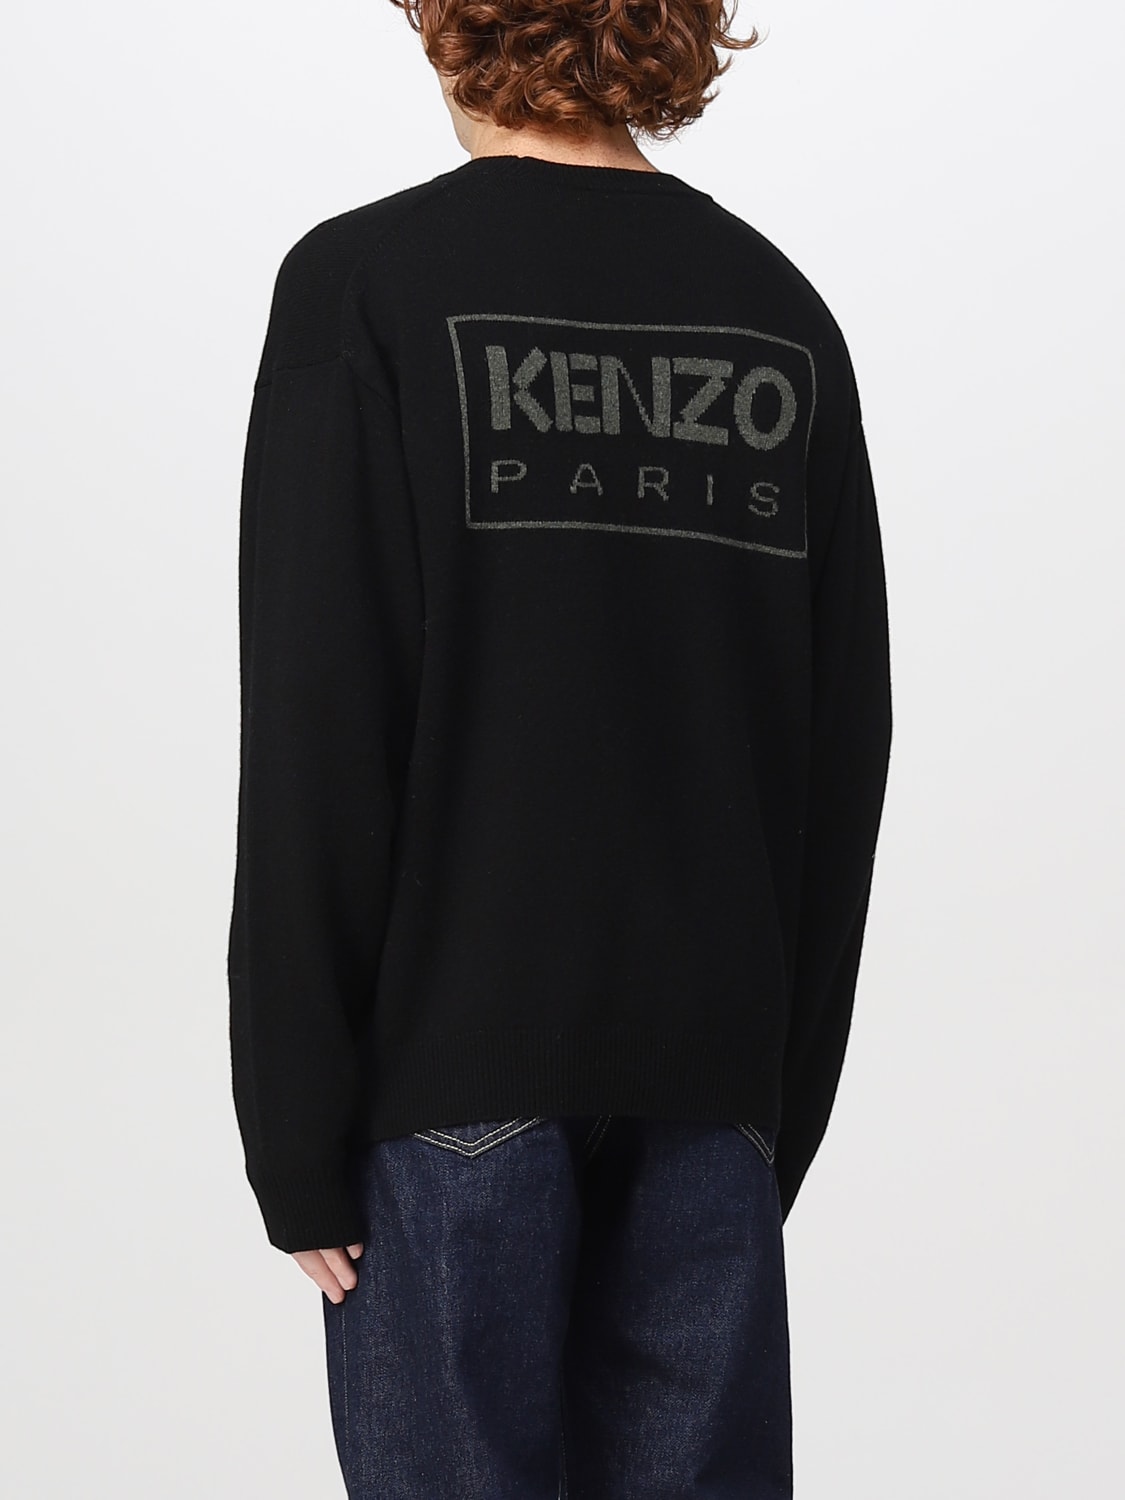 Kenzo Outlet: sweater for man - Black | Kenzo sweater FC65PU3433LC ...